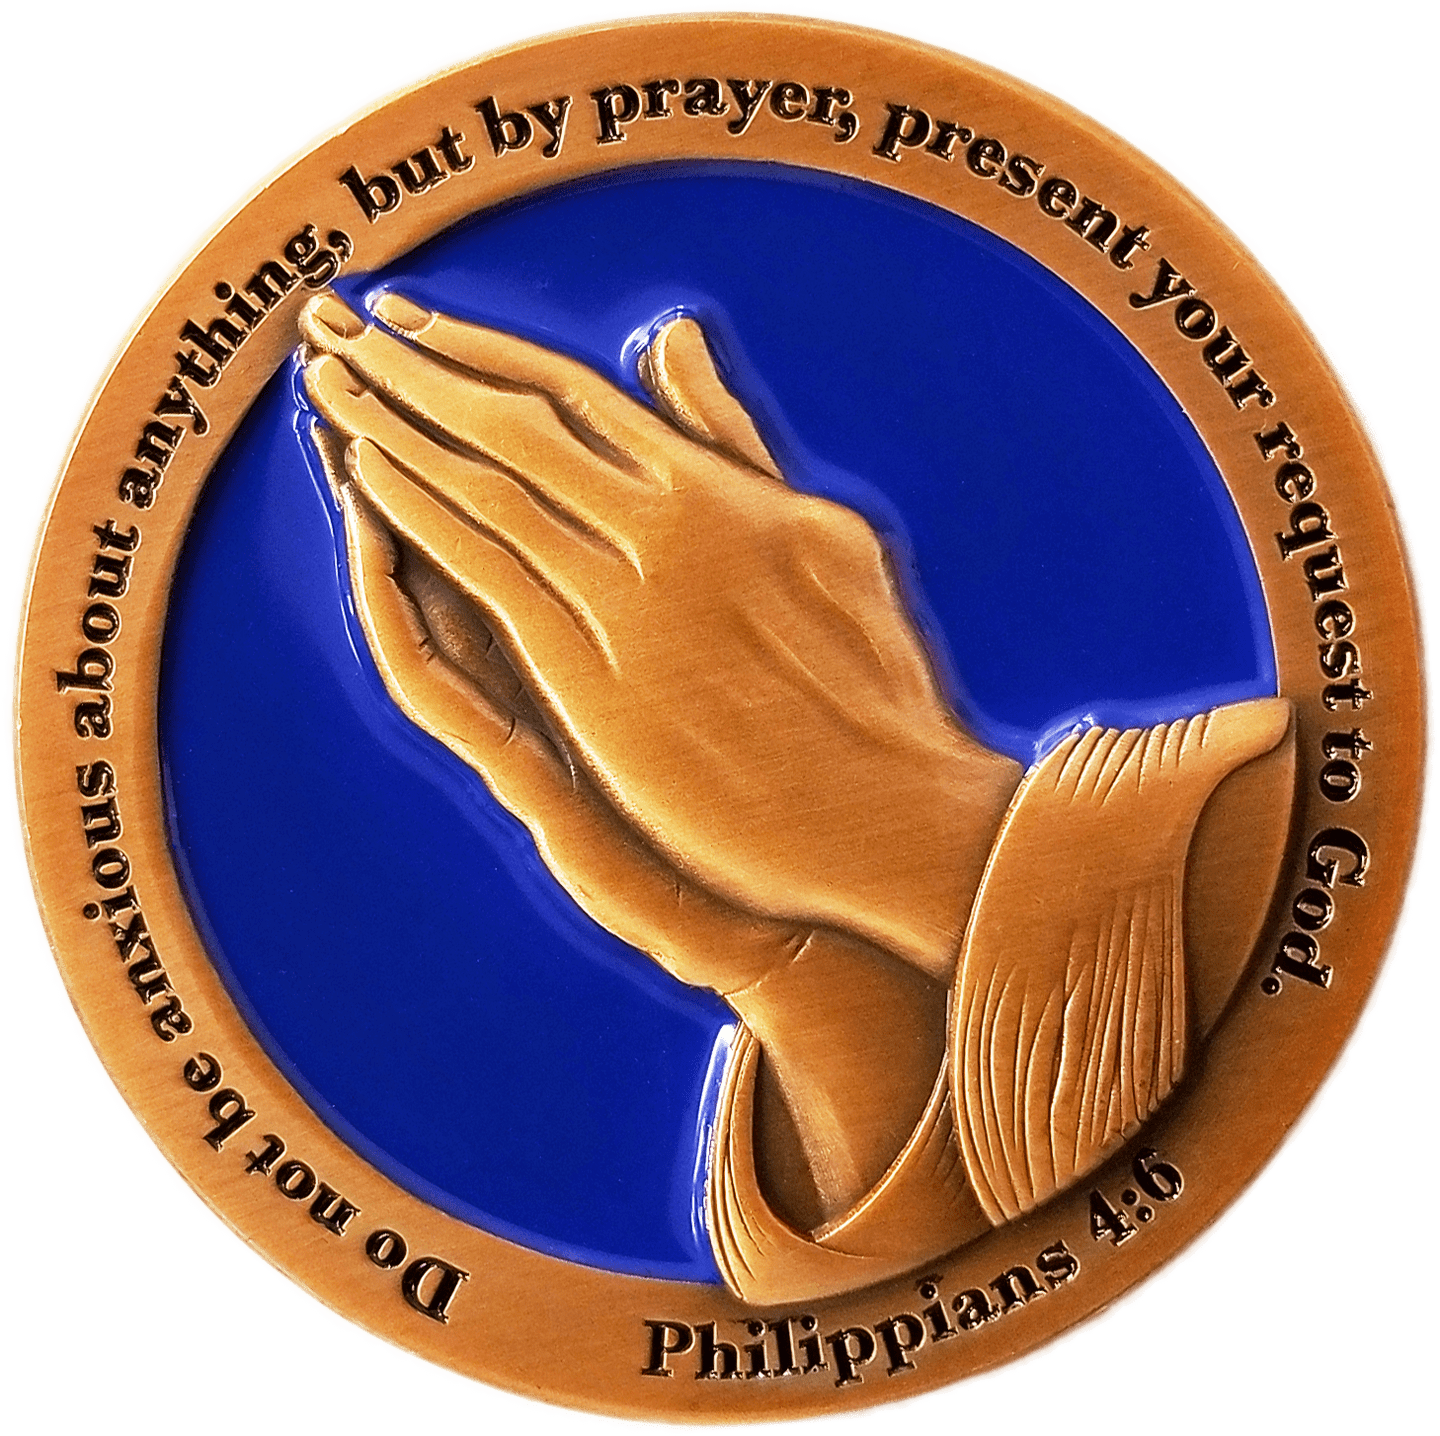 Serenity Prayer Antique Gold Plated Christian Challenge Coin - Philippians 4:6